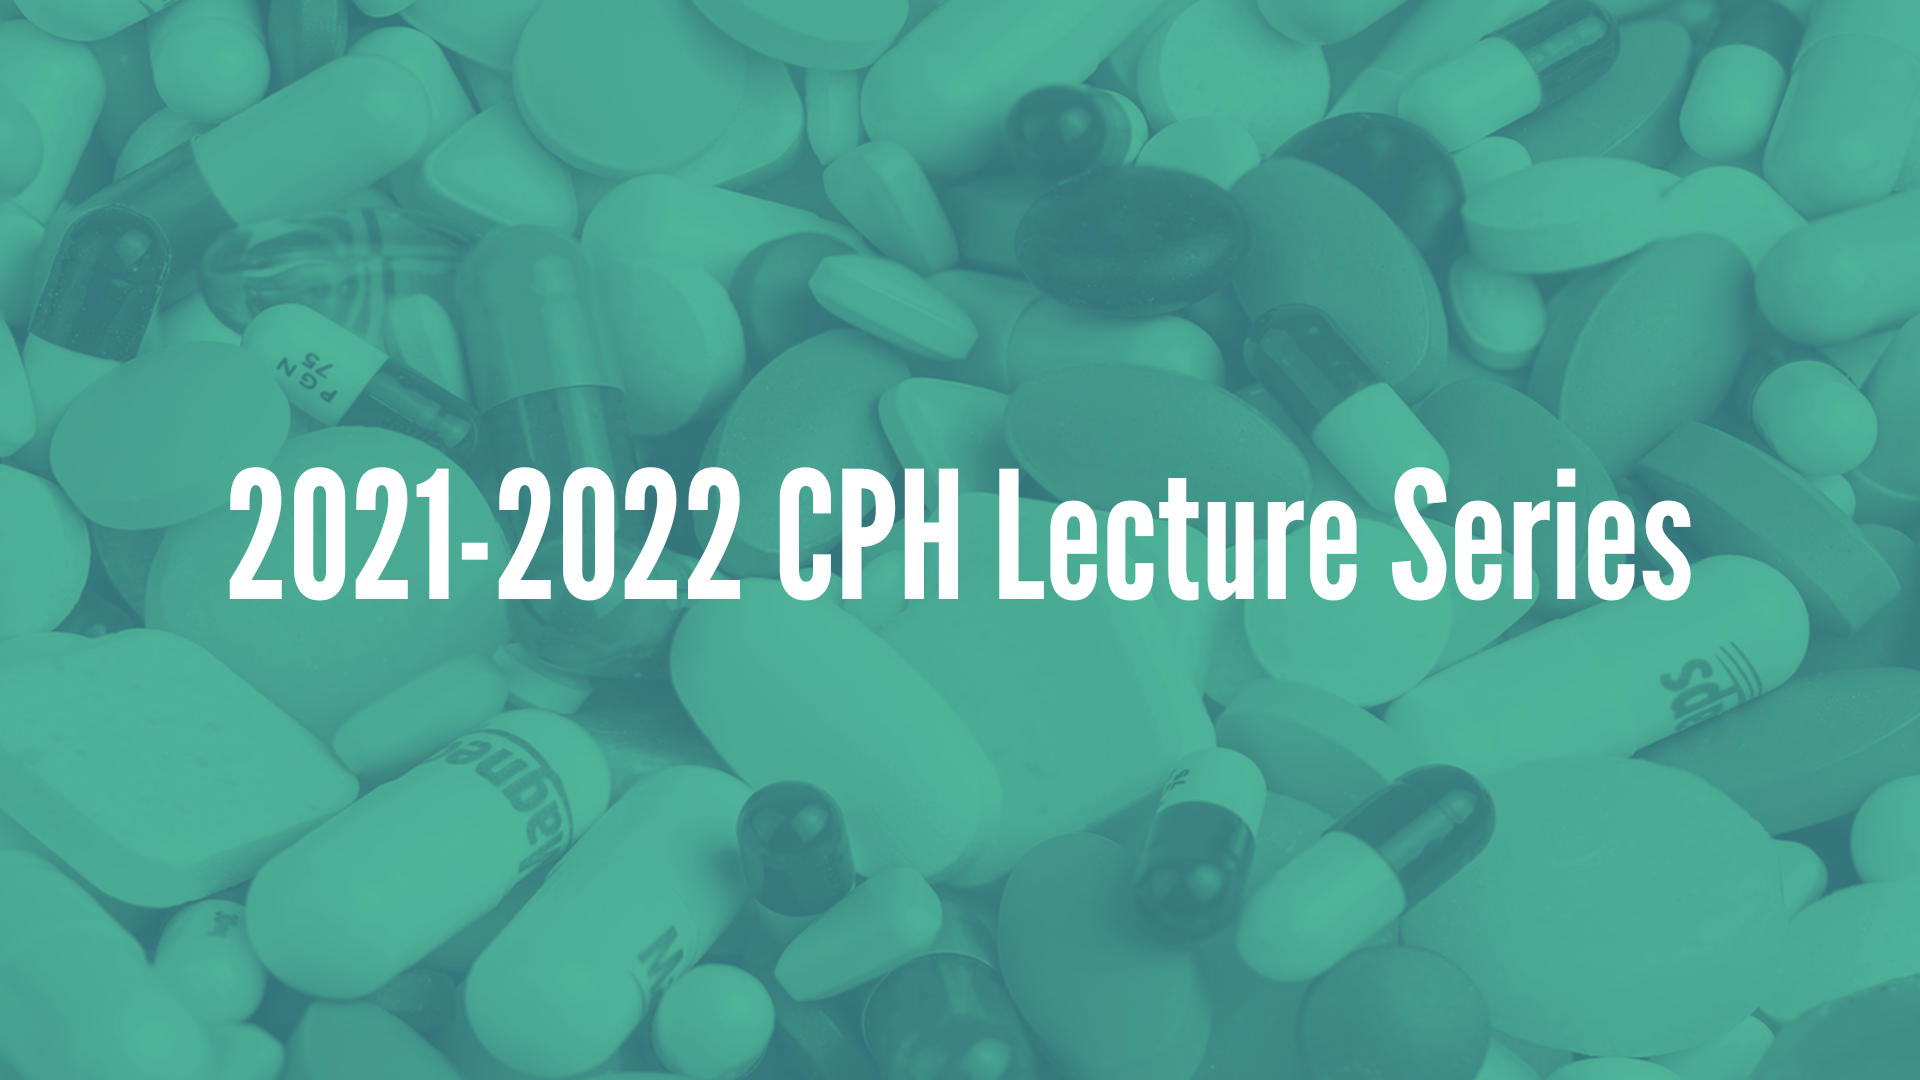 2021-2022-cph-lecture-series-3.png